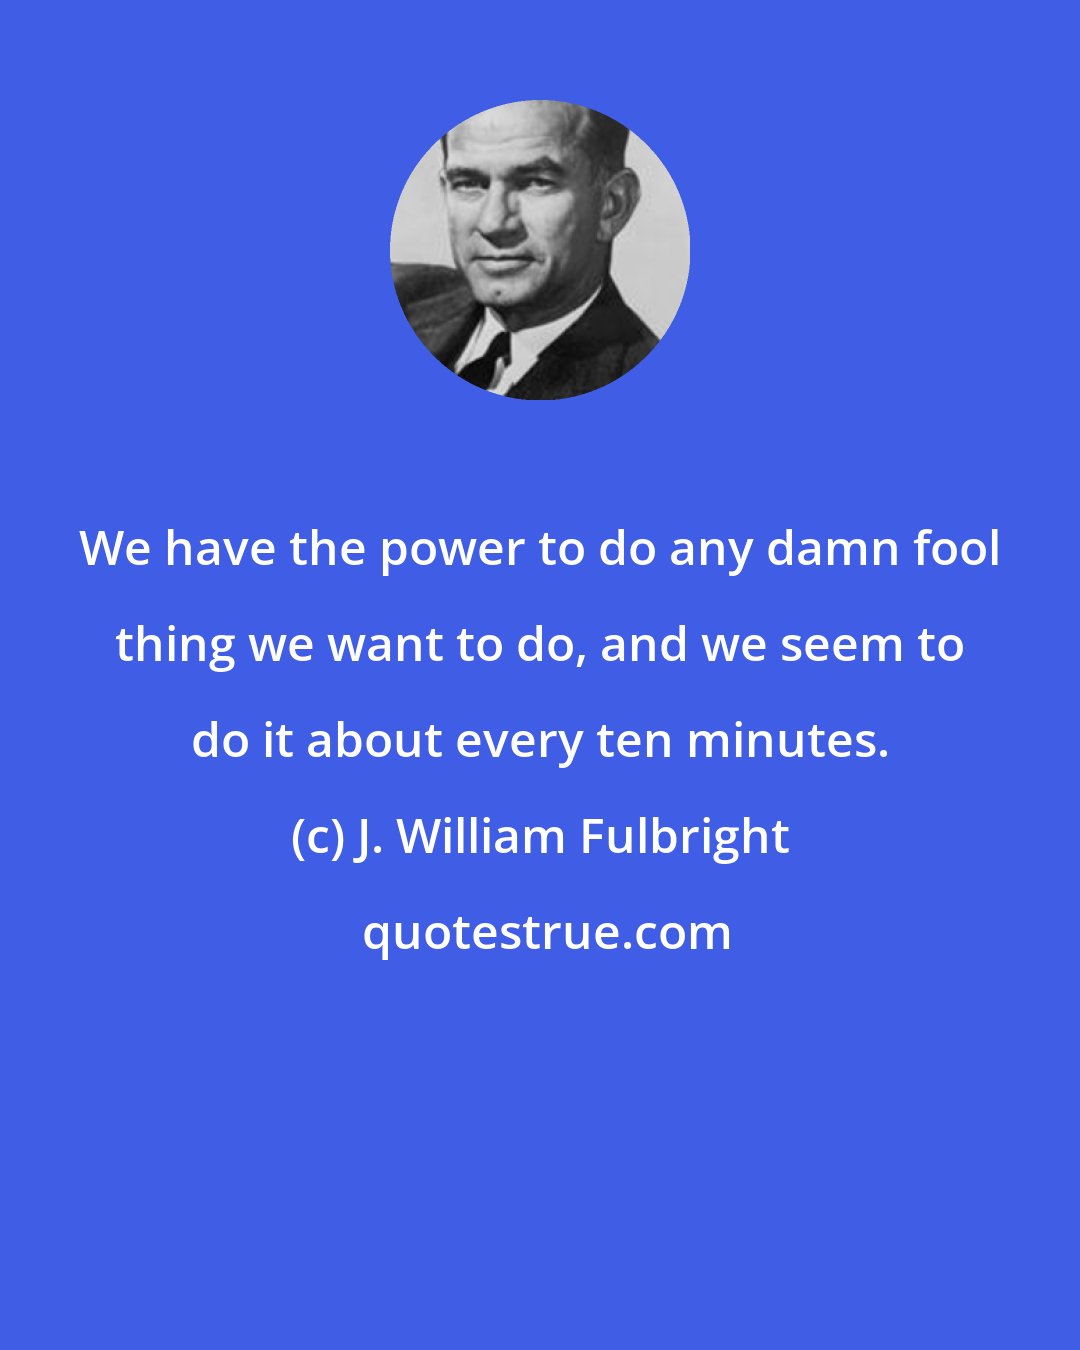 J. William Fulbright: We have the power to do any damn fool thing we want to do, and we seem to do it about every ten minutes.